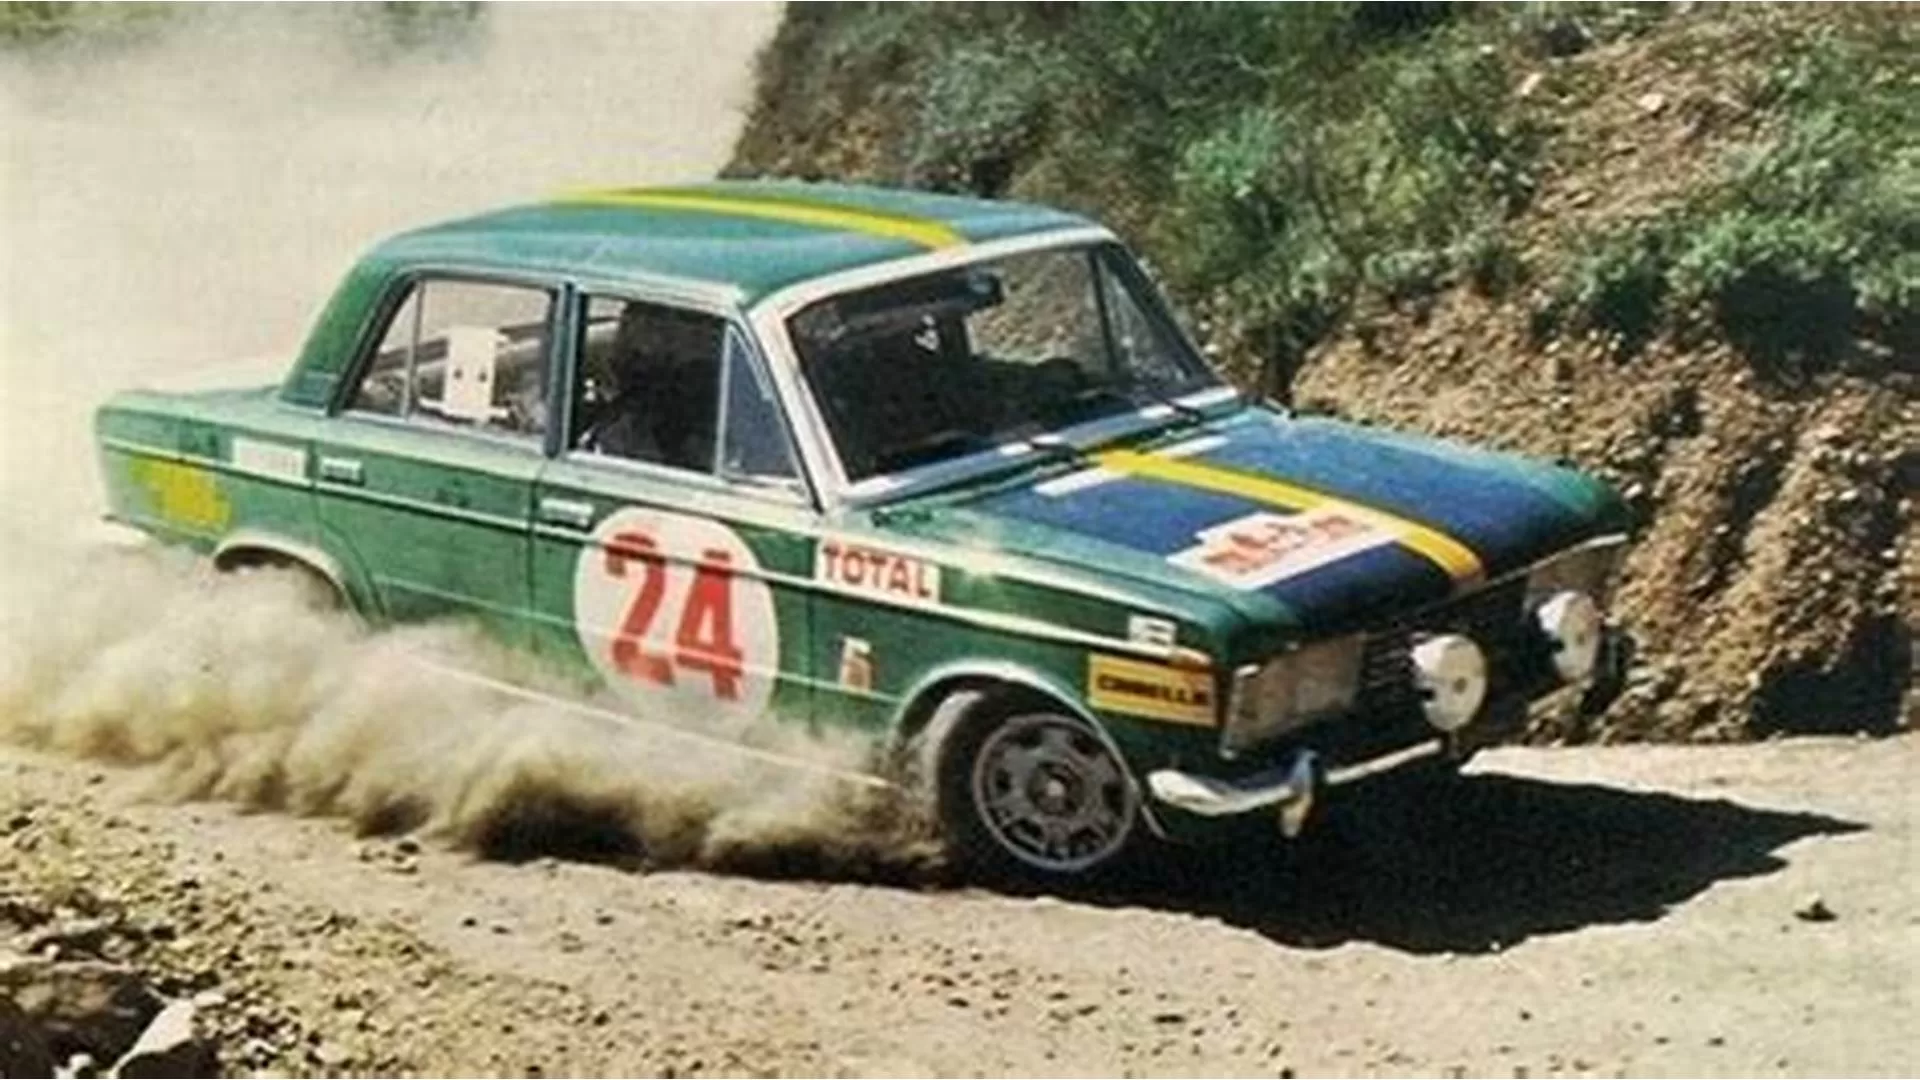 Fiat 125 Rally Car Conquered Rallying’s Golden Era, But How？缩略图